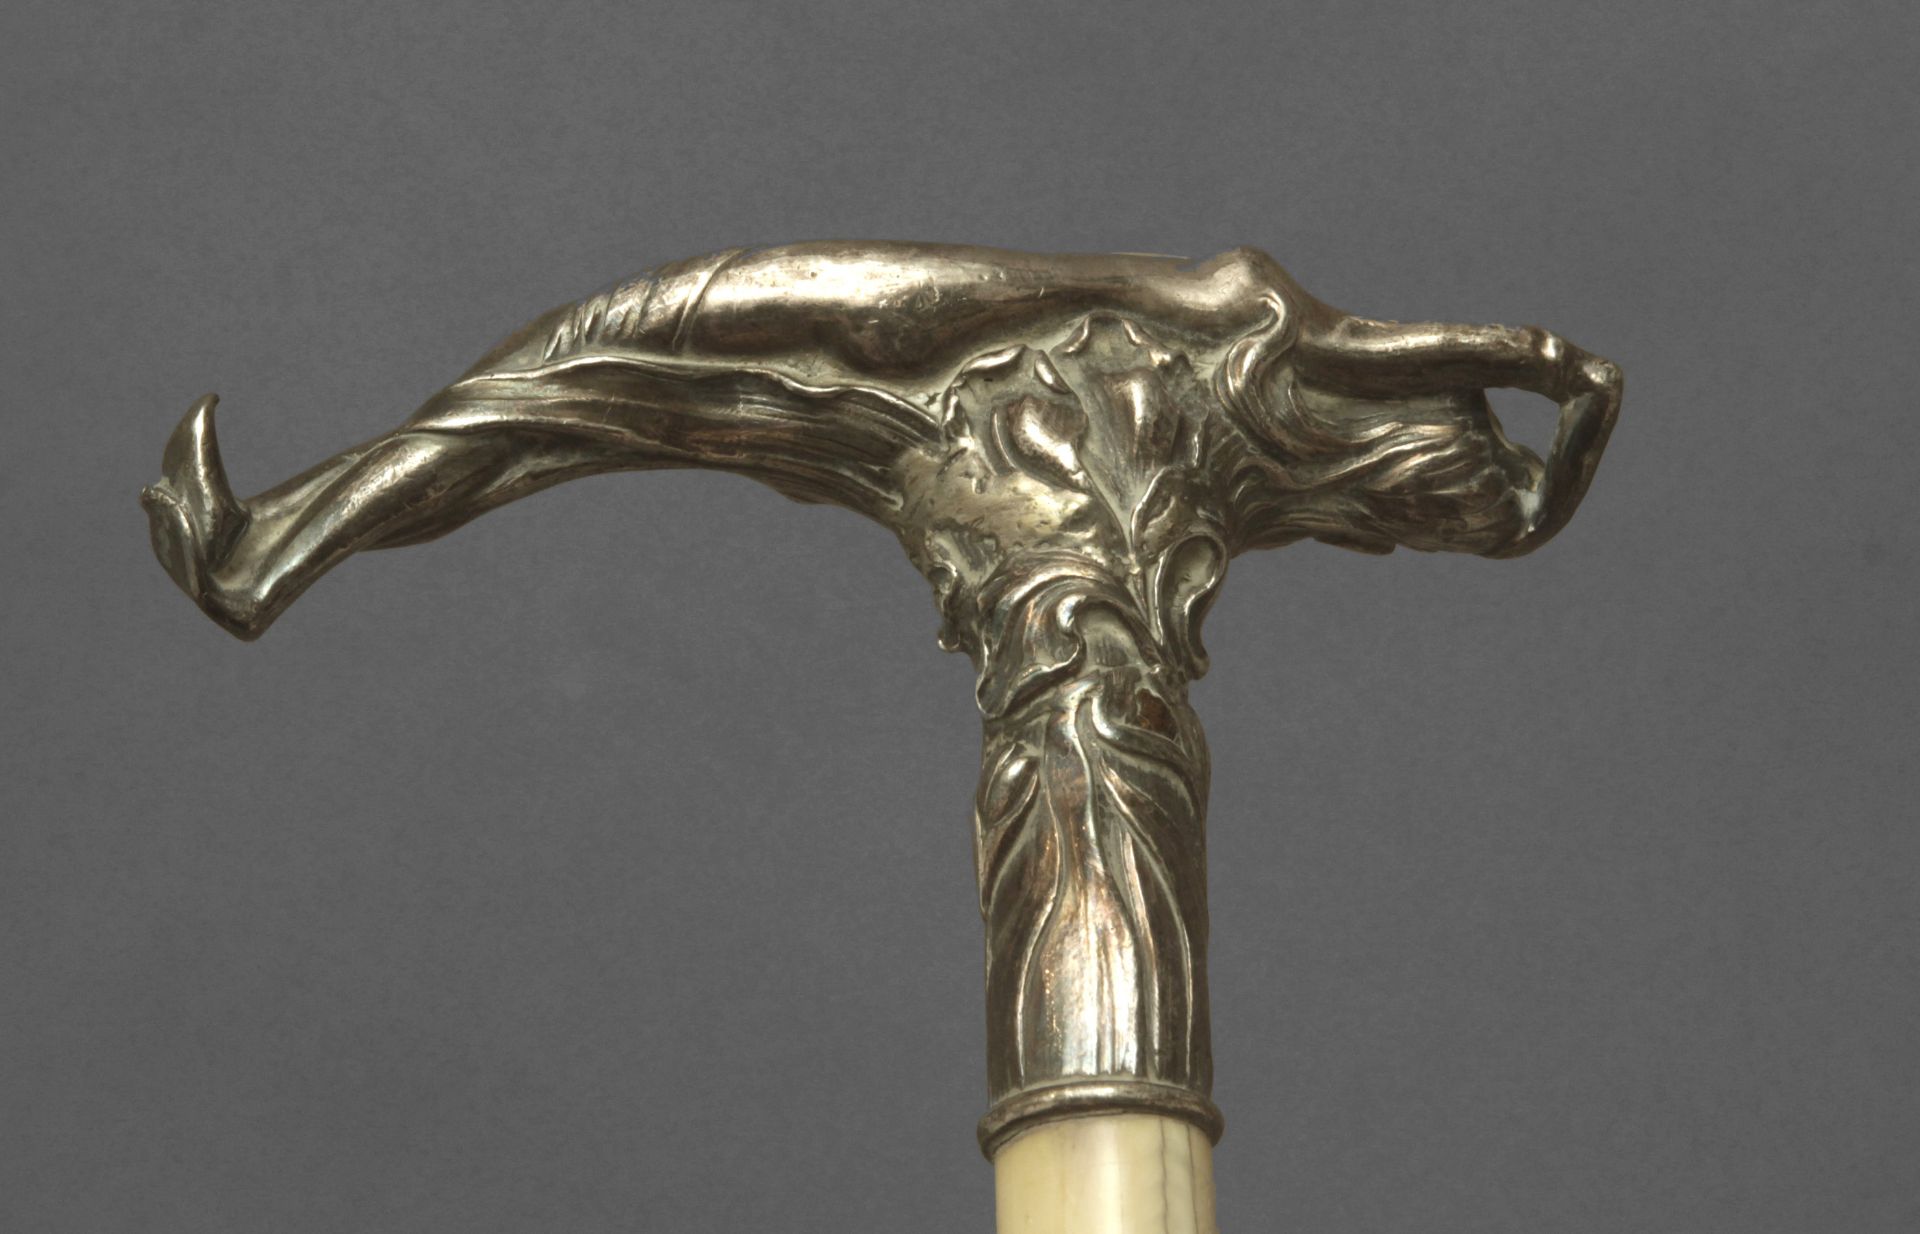 A 19th century silver handled dress cane, probably Germany - Image 11 of 13